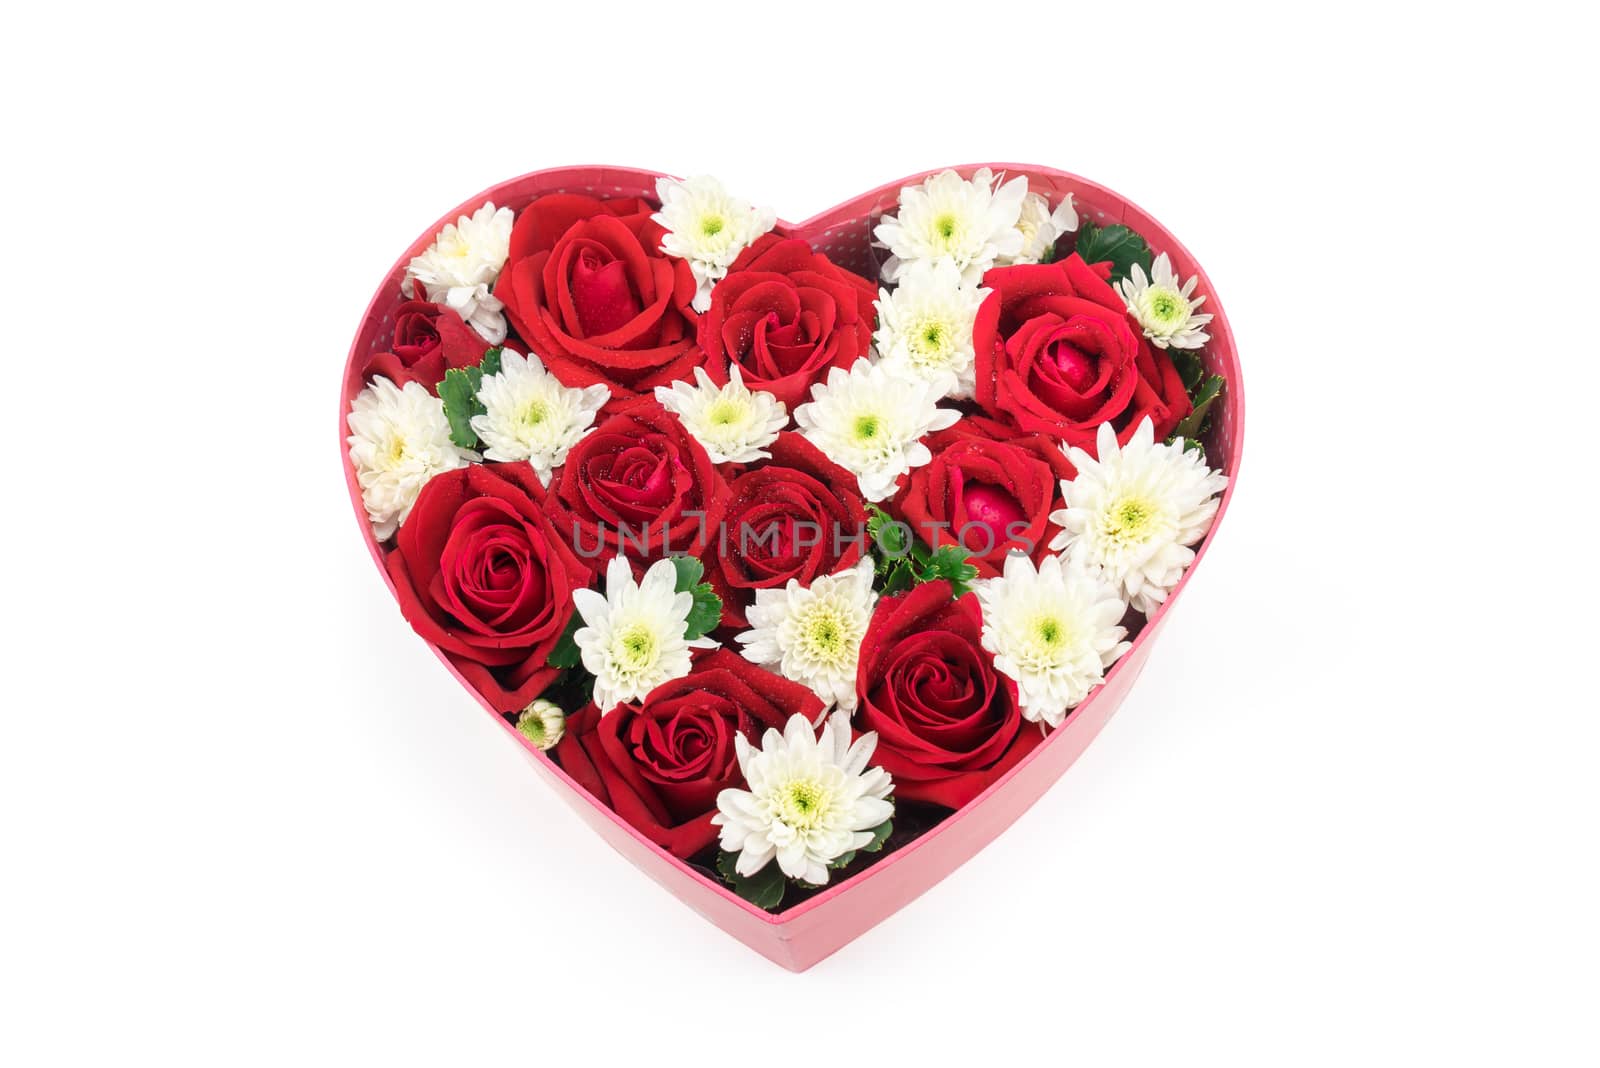 Roses and carnations held in the heart shape box by iamway